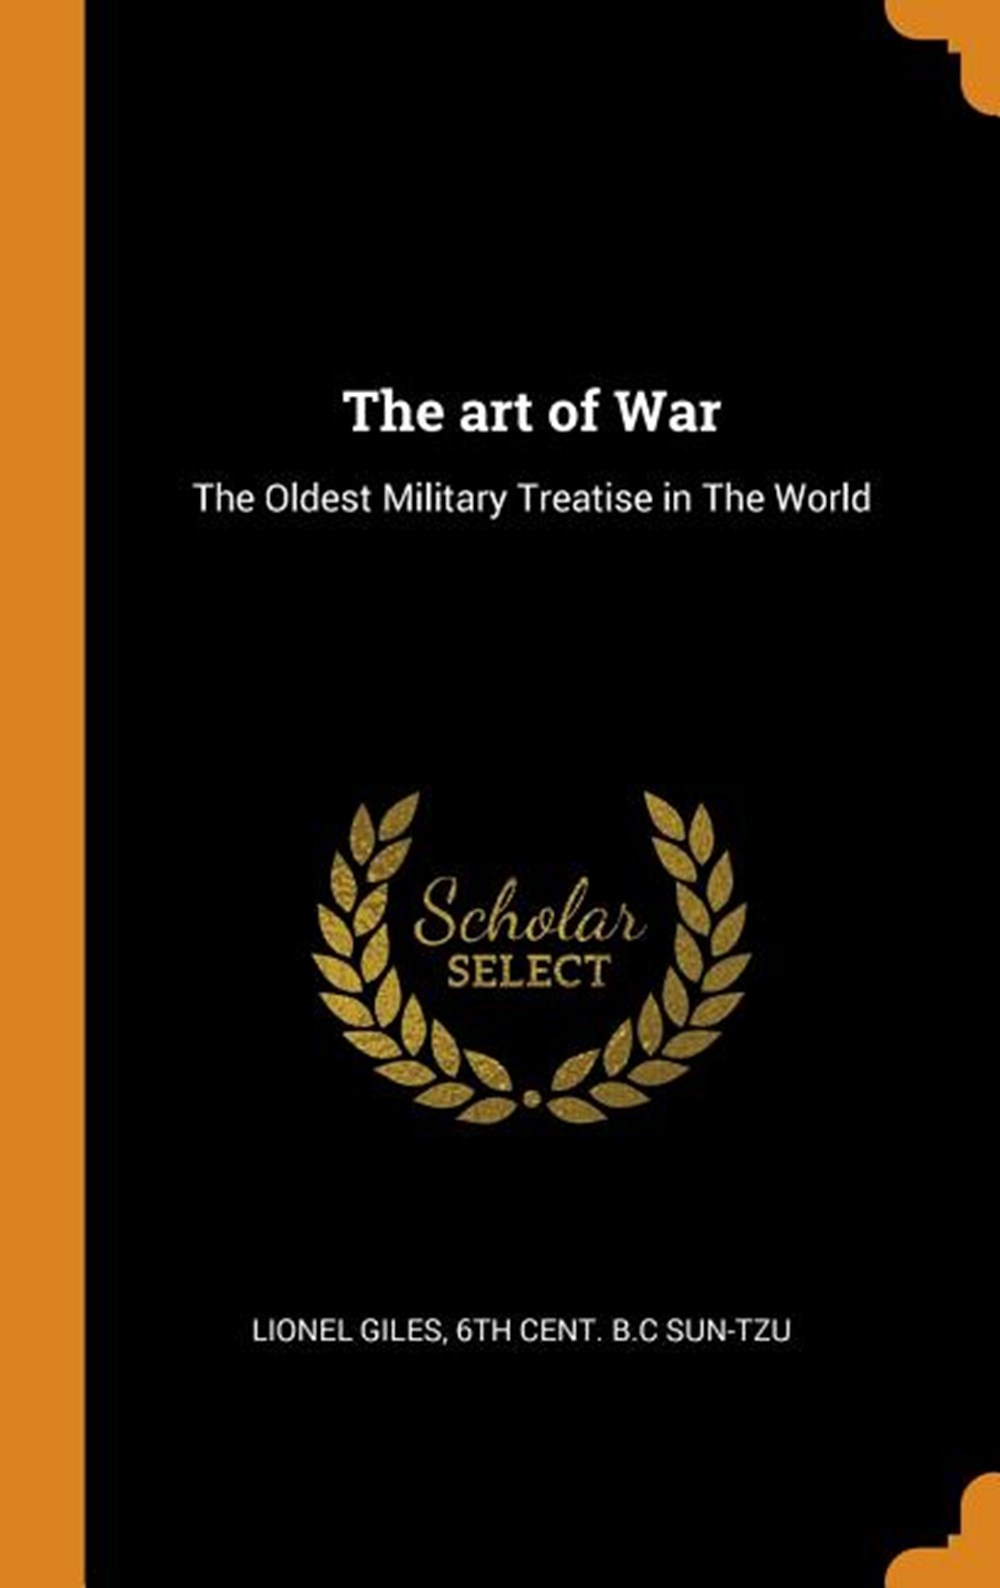 Art of War: The Oldest Military Treatise in the World